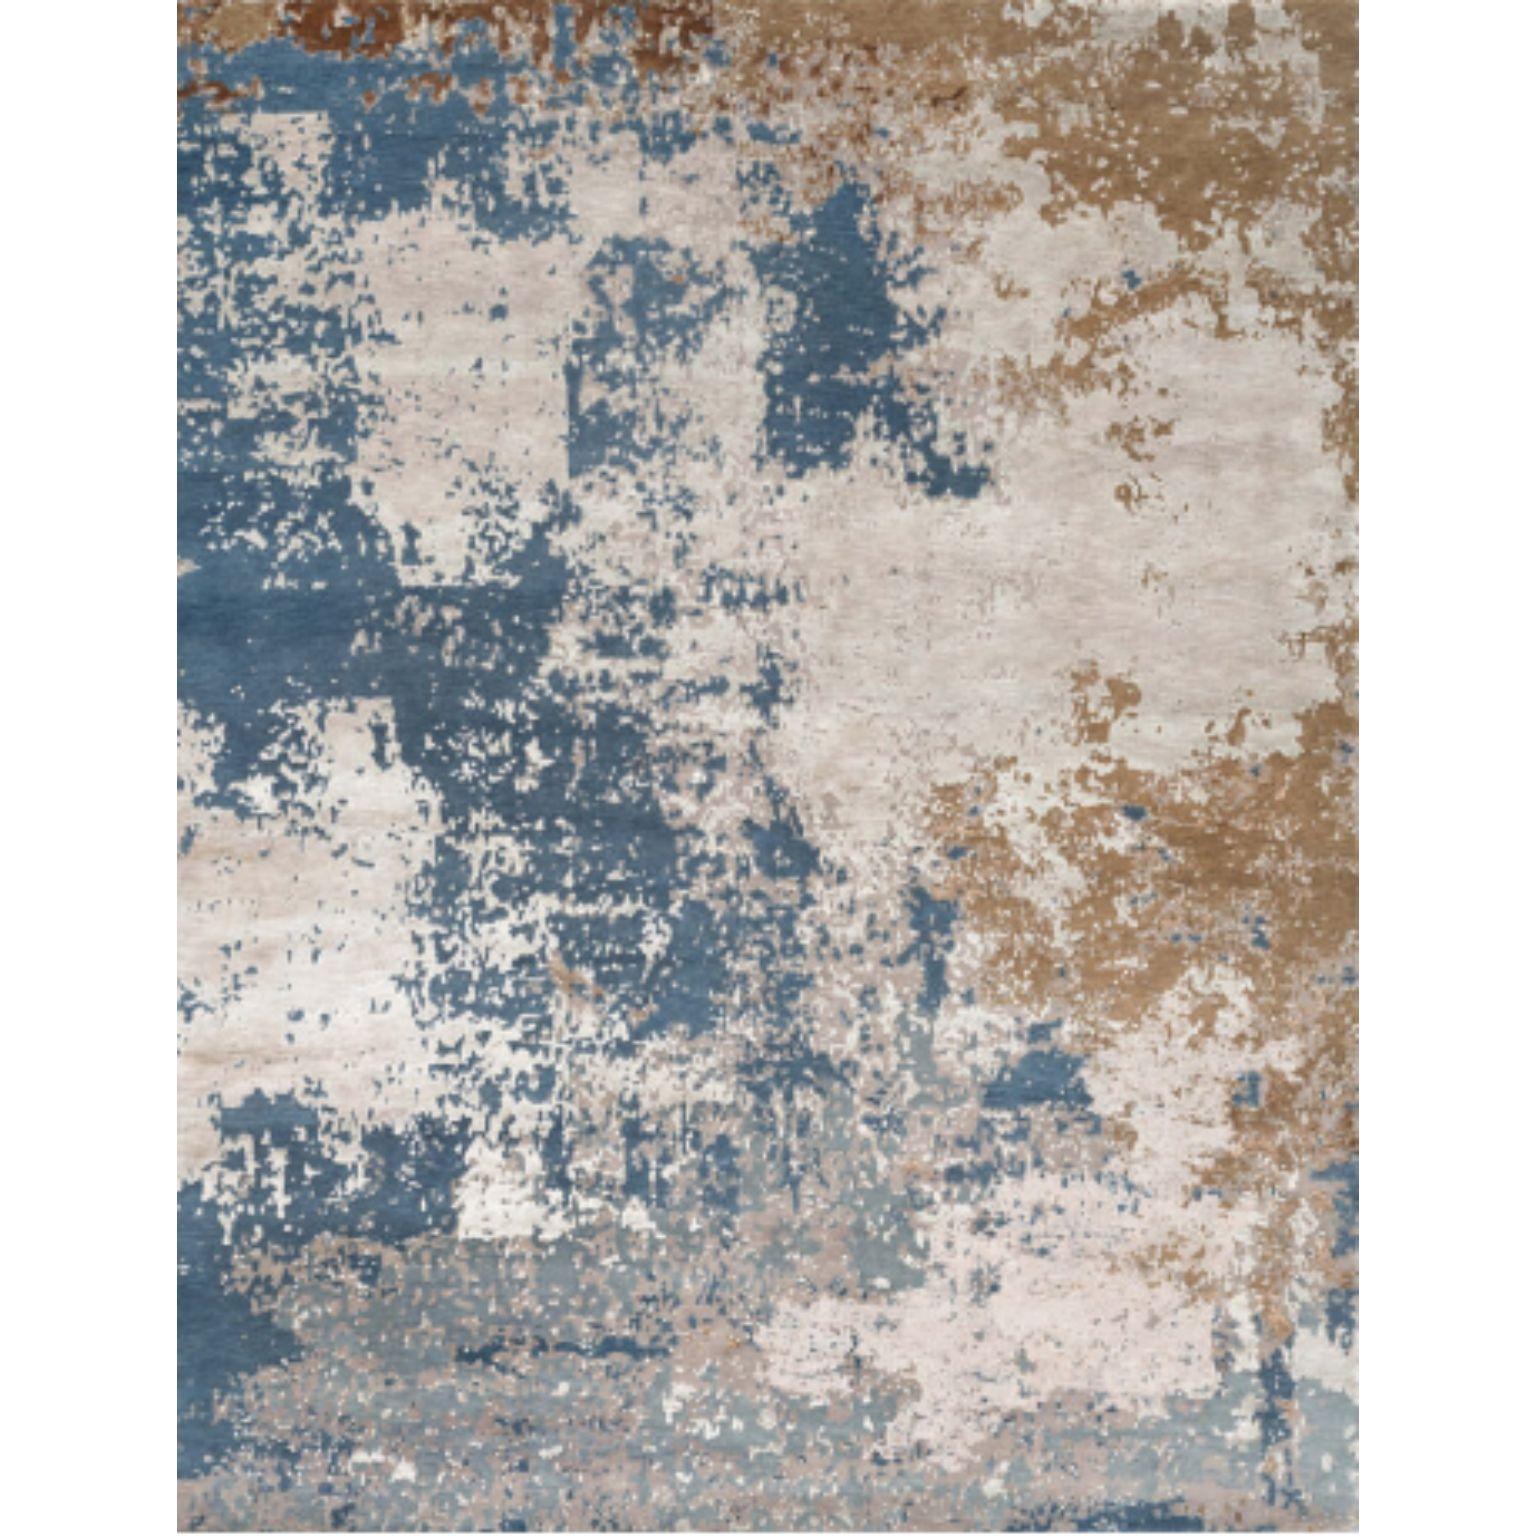 RAW 200 rug by Illulian
Dimensions: D300 x H200 cm 
Materials: Wool 50%, Silk 50%
Variations available and prices may vary according to materials and sizes.

Illulian, historic and prestigious rug company brand, internationally renowned in the